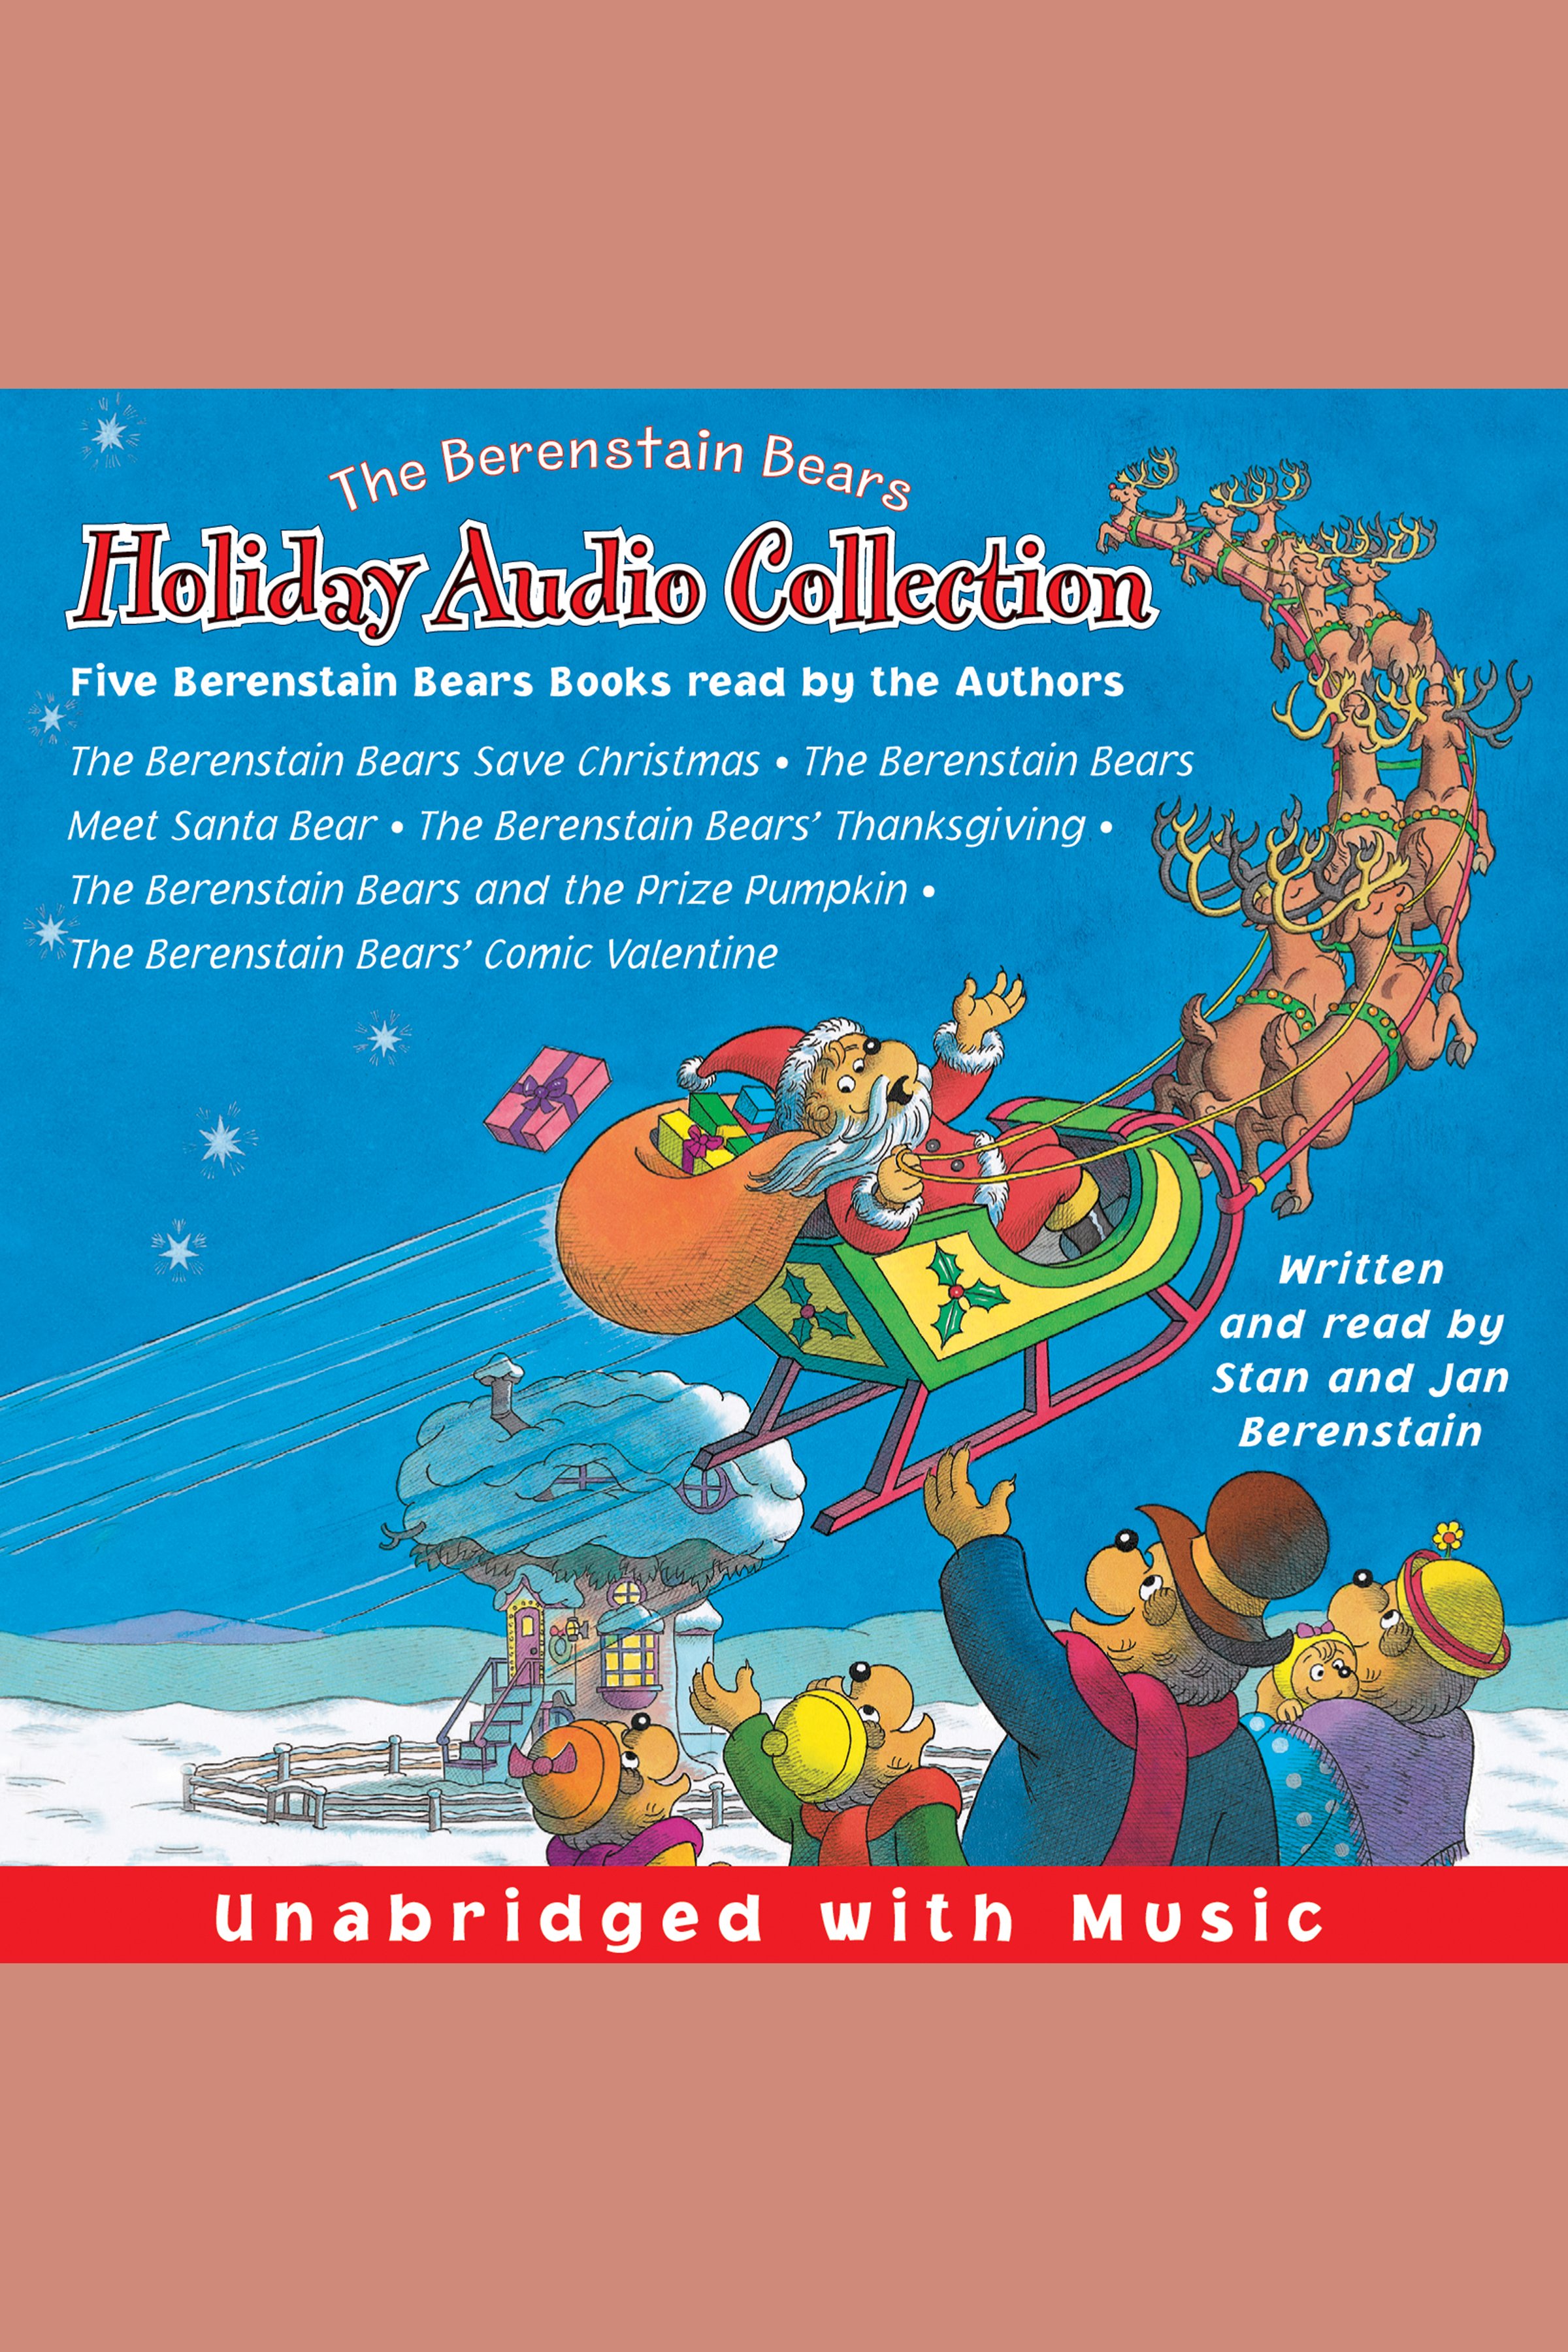 The Berenstain Bears holiday audio collection cover image